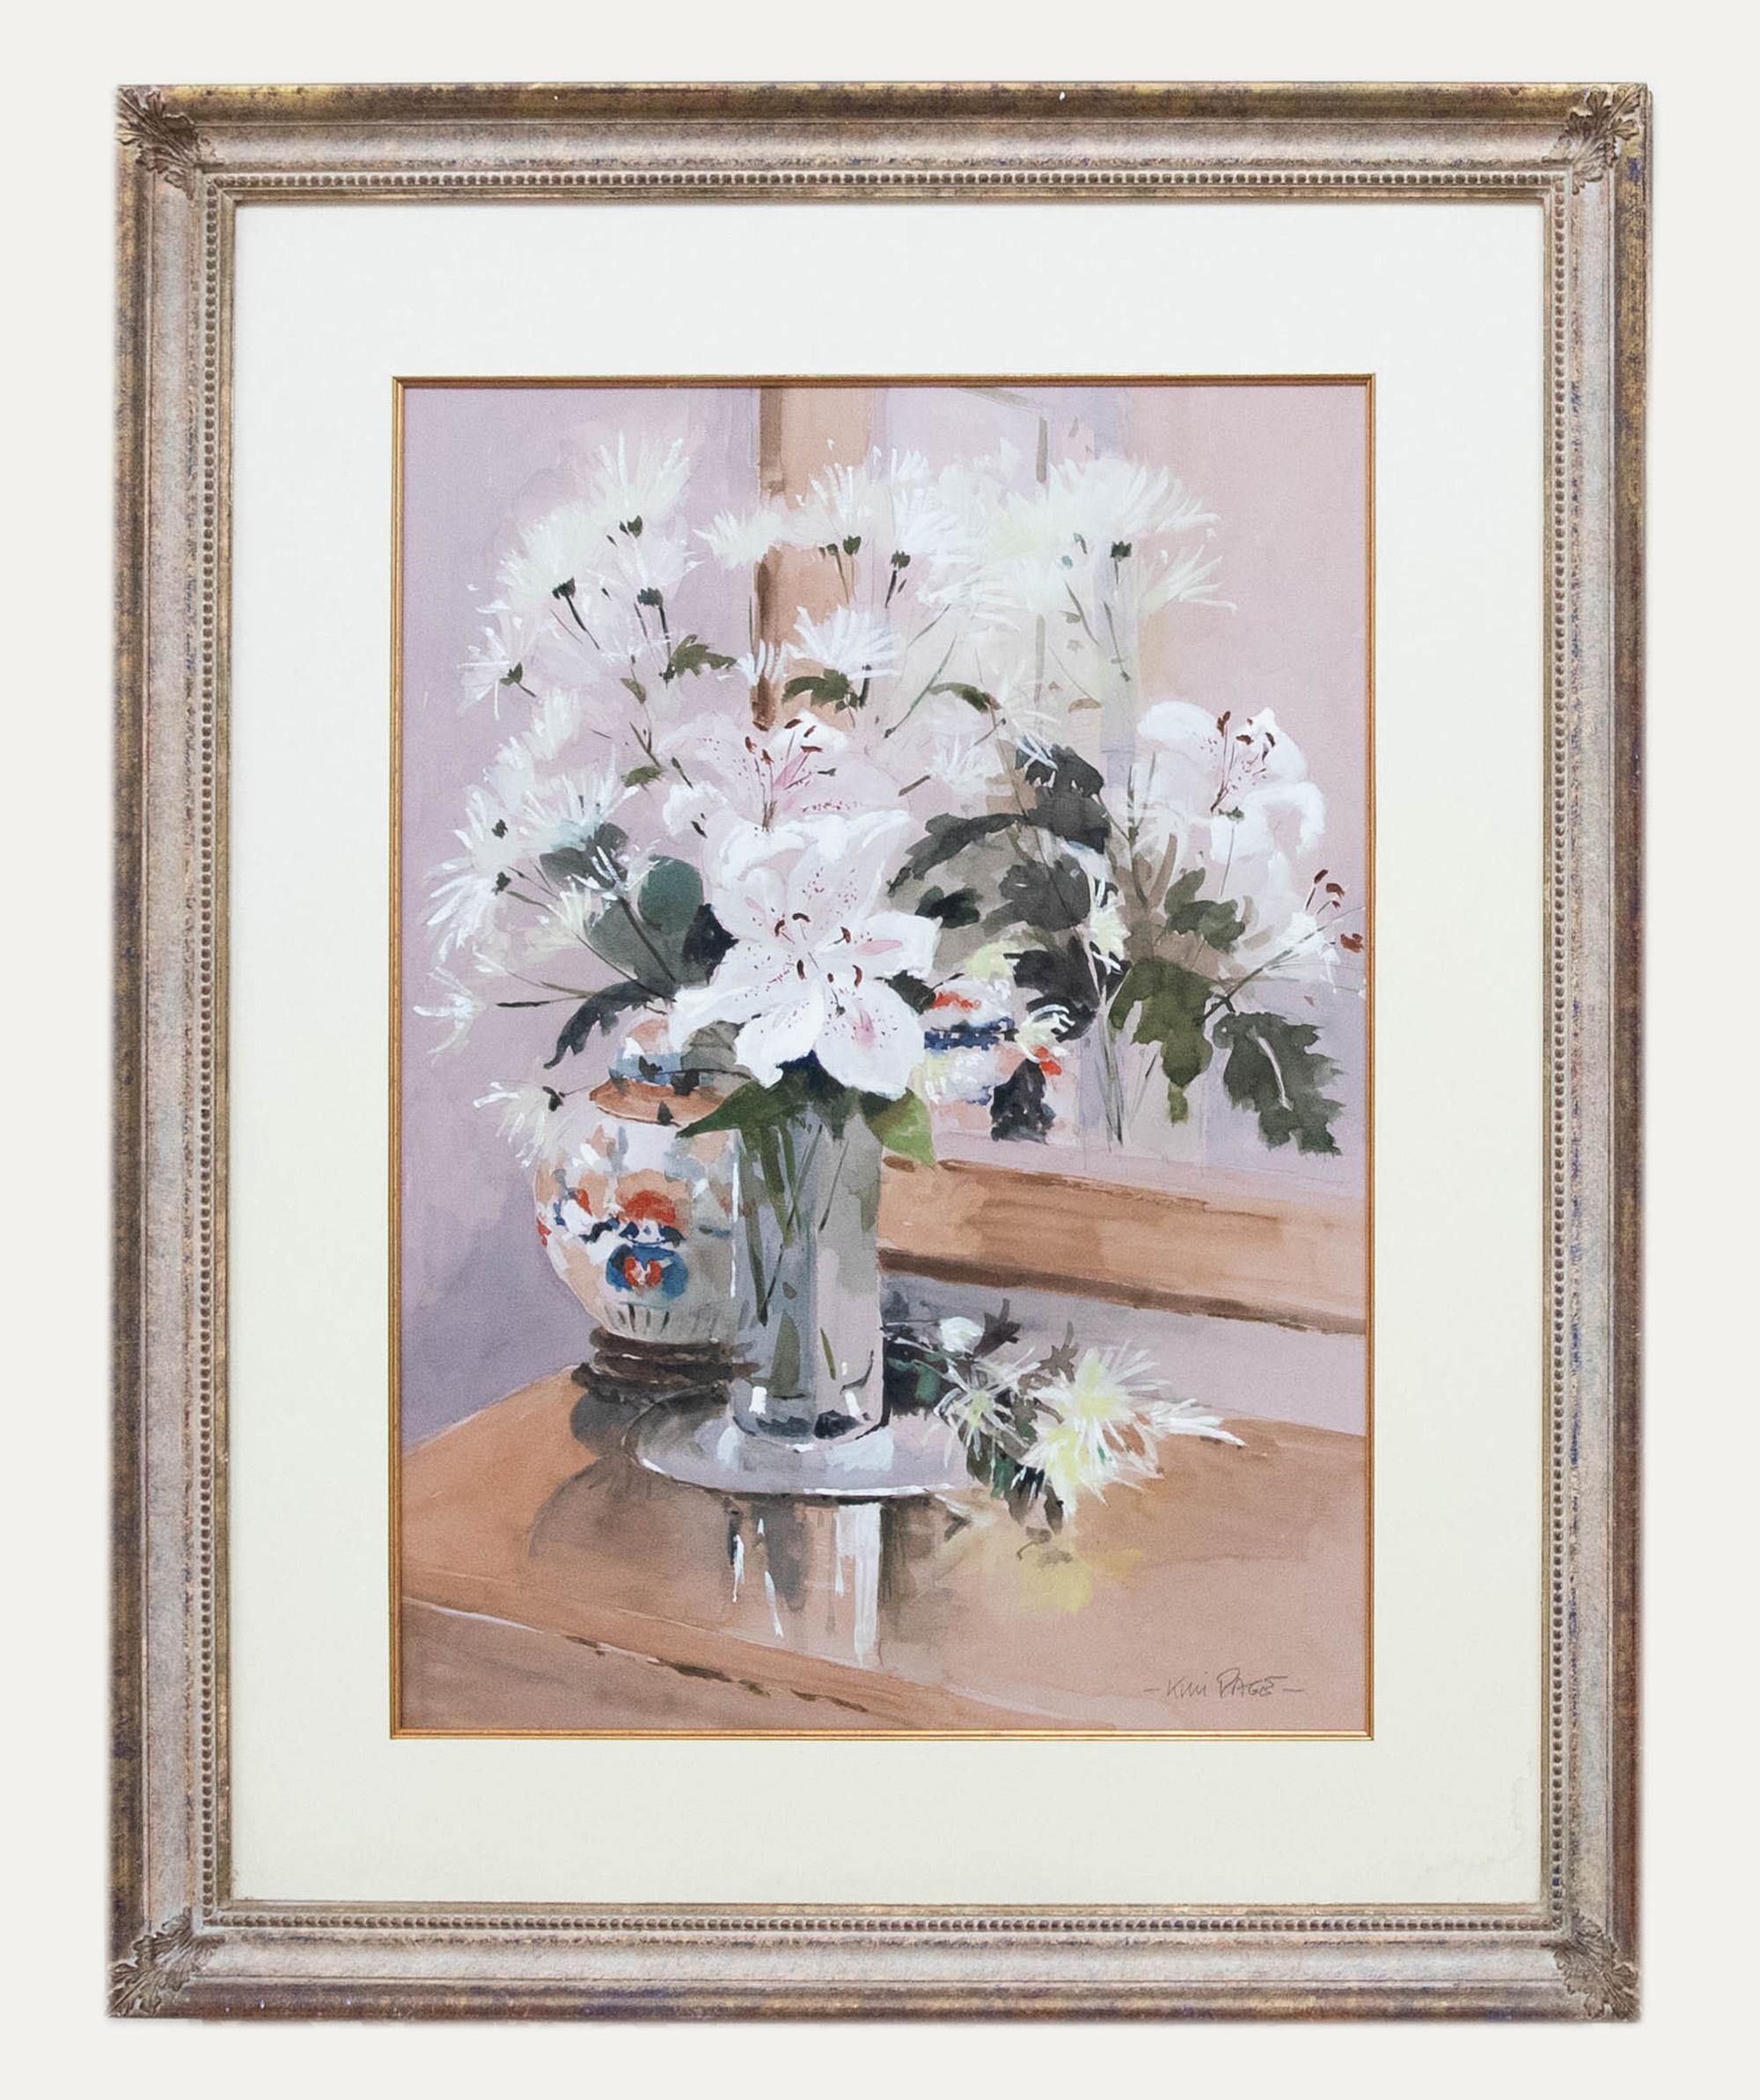 Unknown Still-Life - Kim Page - Framed Contemporary Watercolour, Still Life of White Lilies